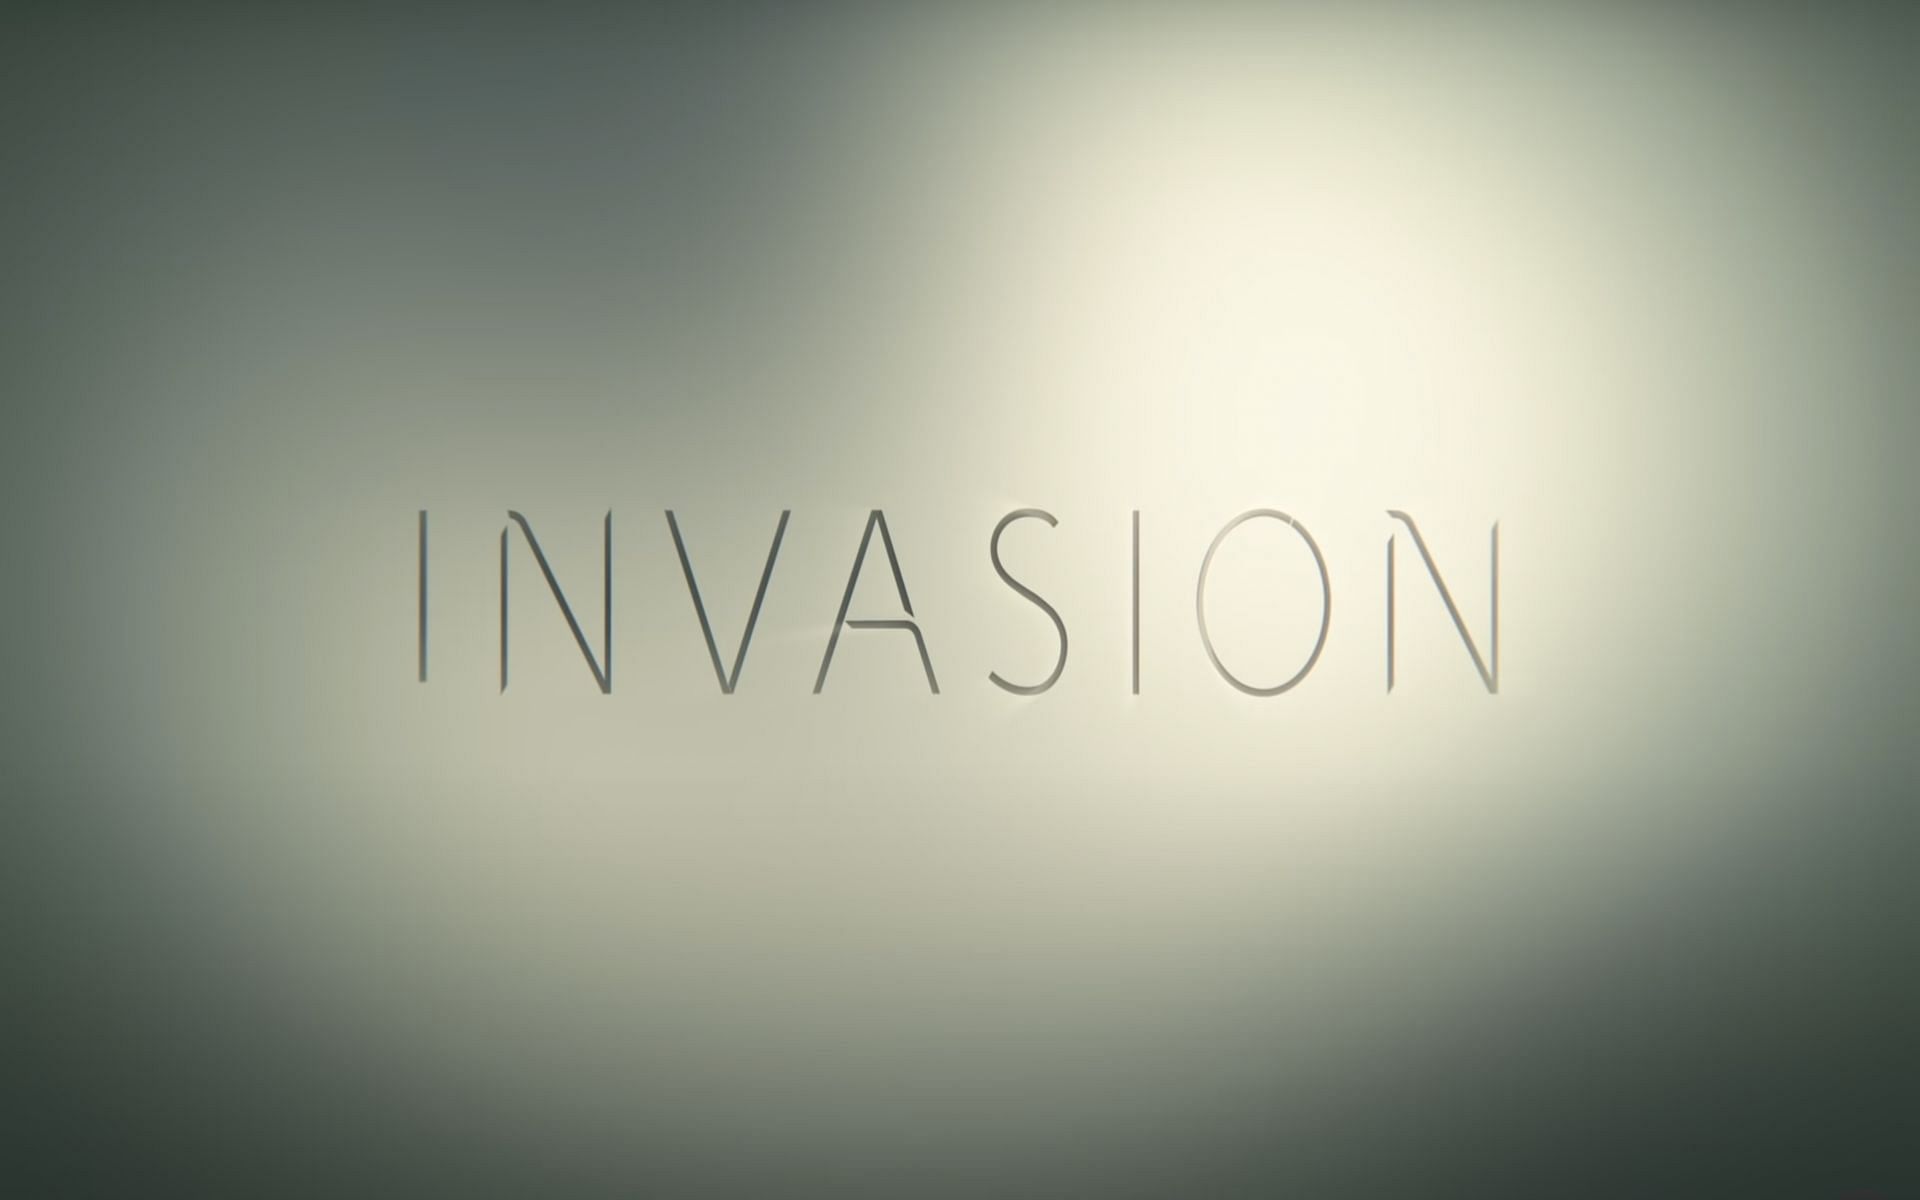 Invasion 2021 Tv Show Wallpapers